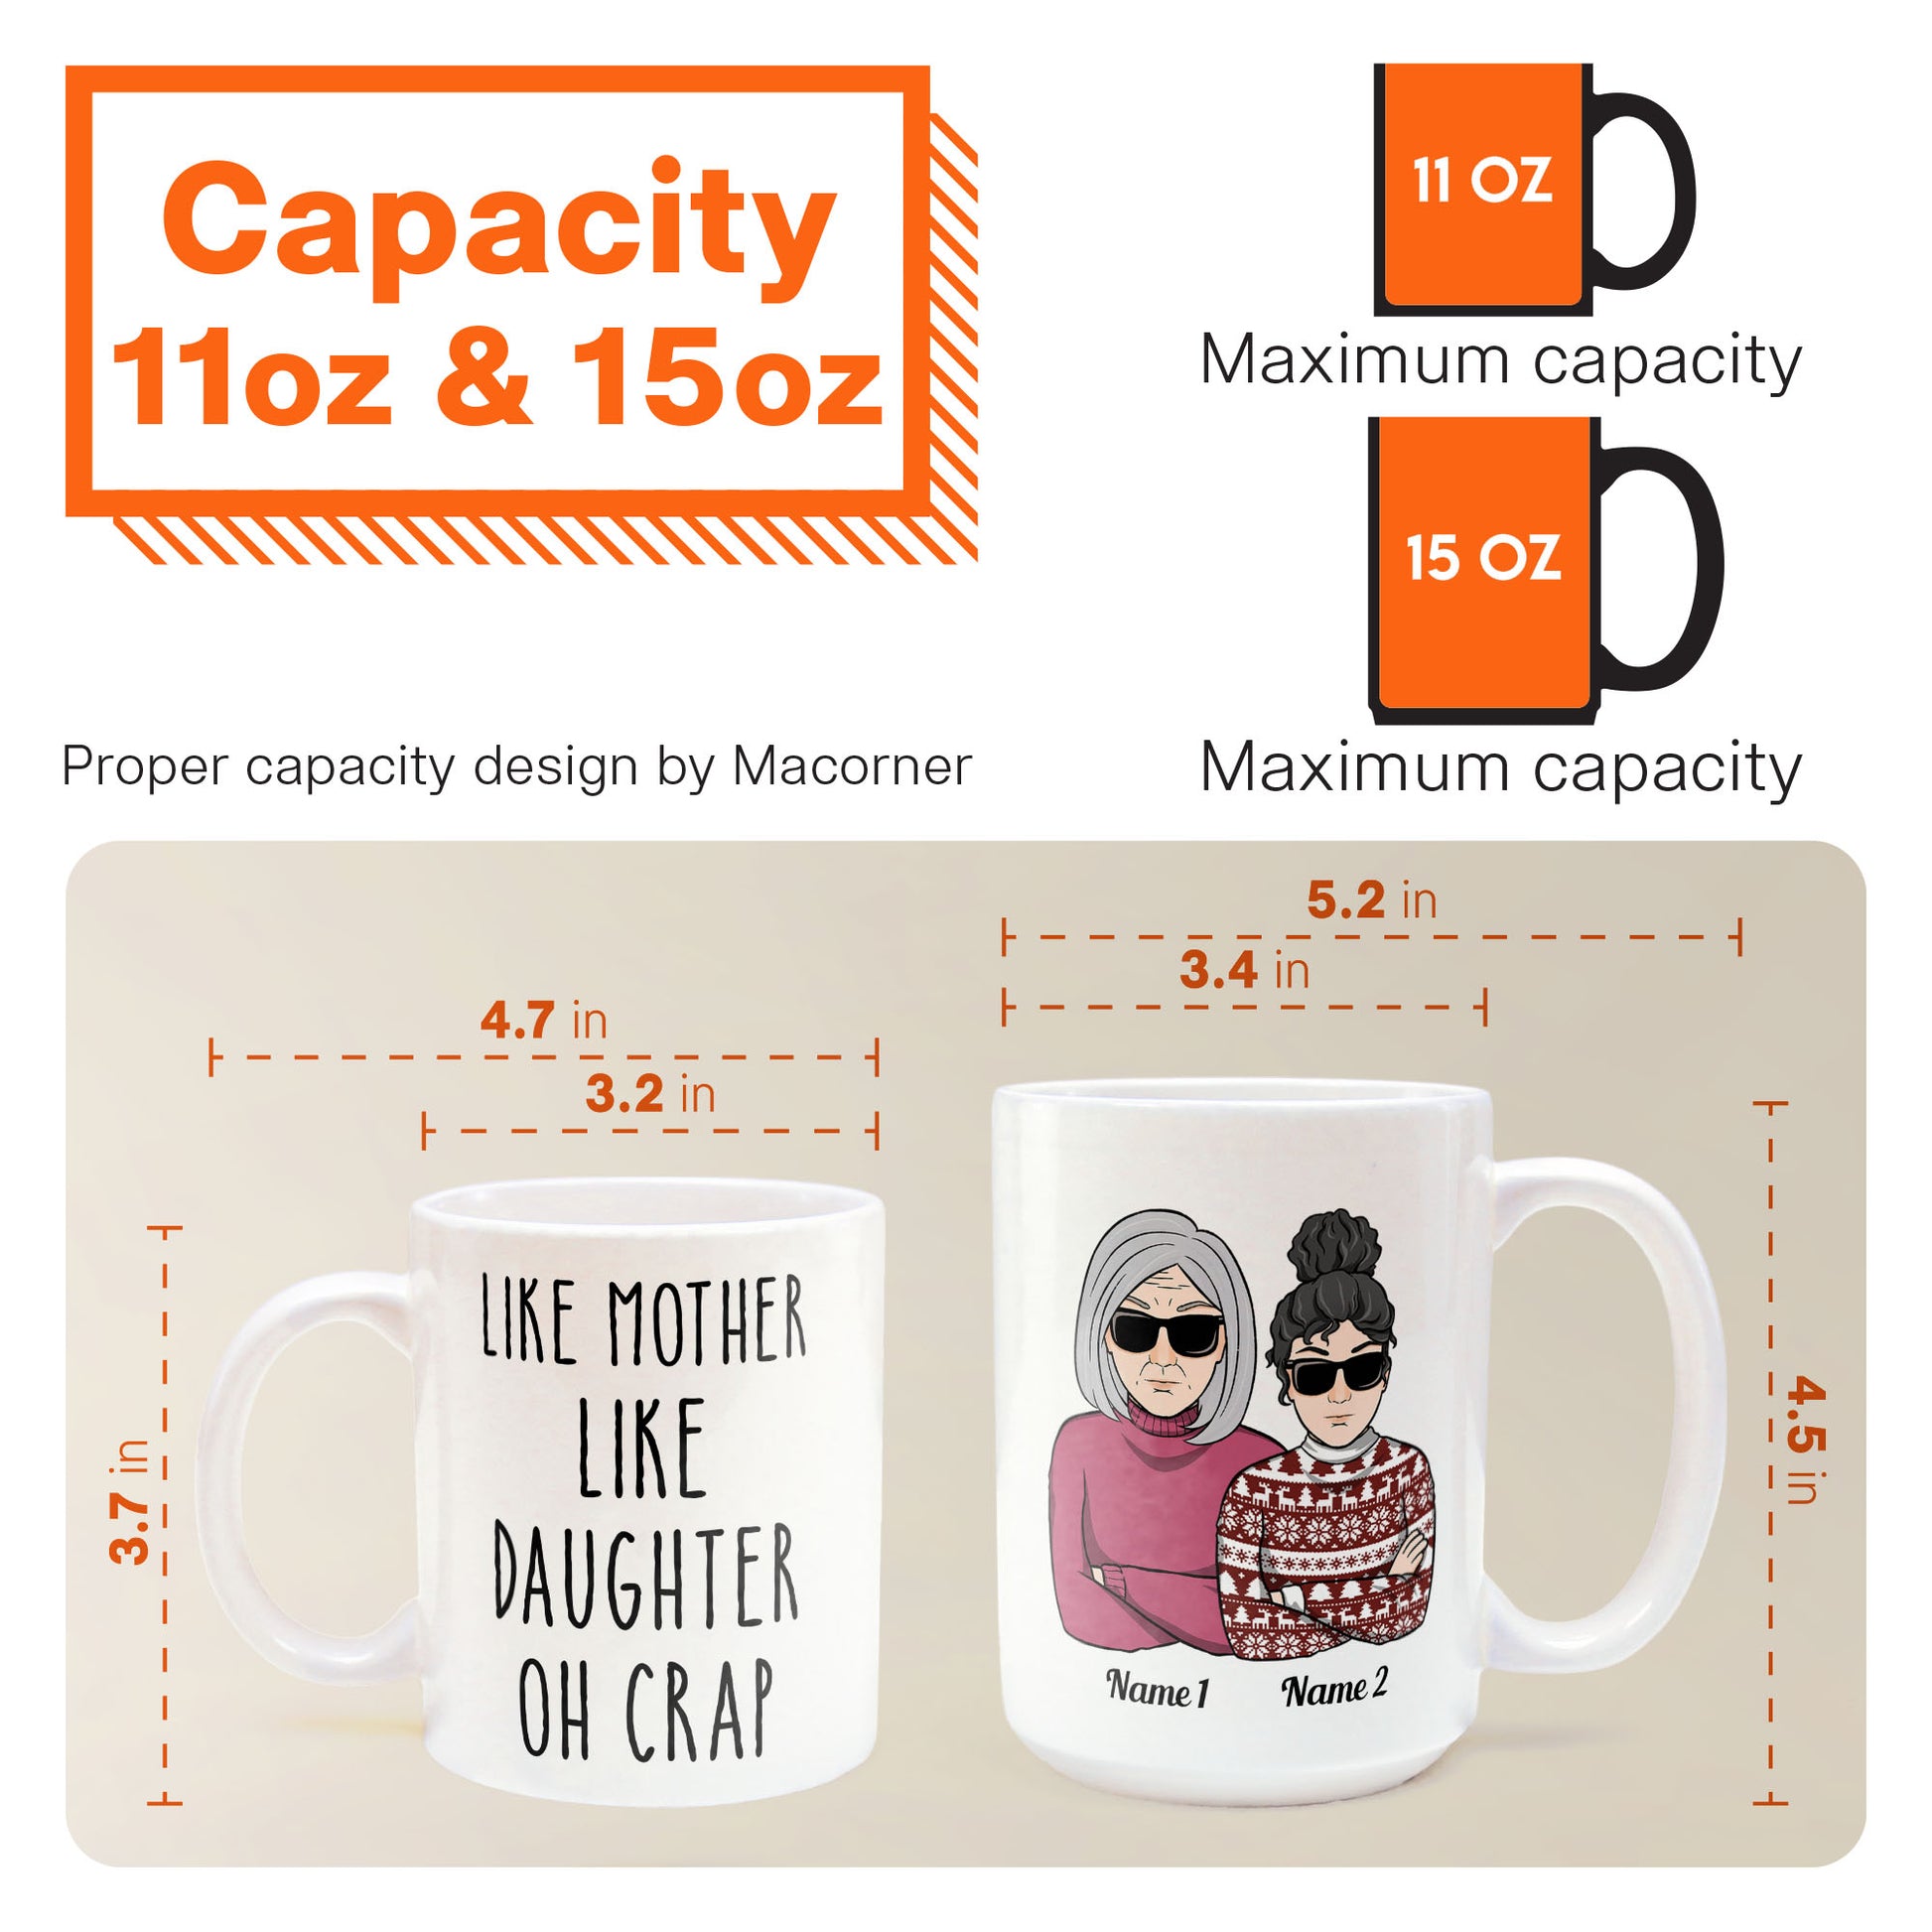 https://macorner.co/cdn/shop/products/Like-Father-Like-Daughter-Oh-Crap-Personalized-Mug-Christmas-Gift-For-Fathers_-Mothers_-Grandpas_-Grandmas_-Sons-_-Daughters_1_79c453df-d0cc-4536-8dff-3a0c62157890.jpg?v=1636361984&width=1946